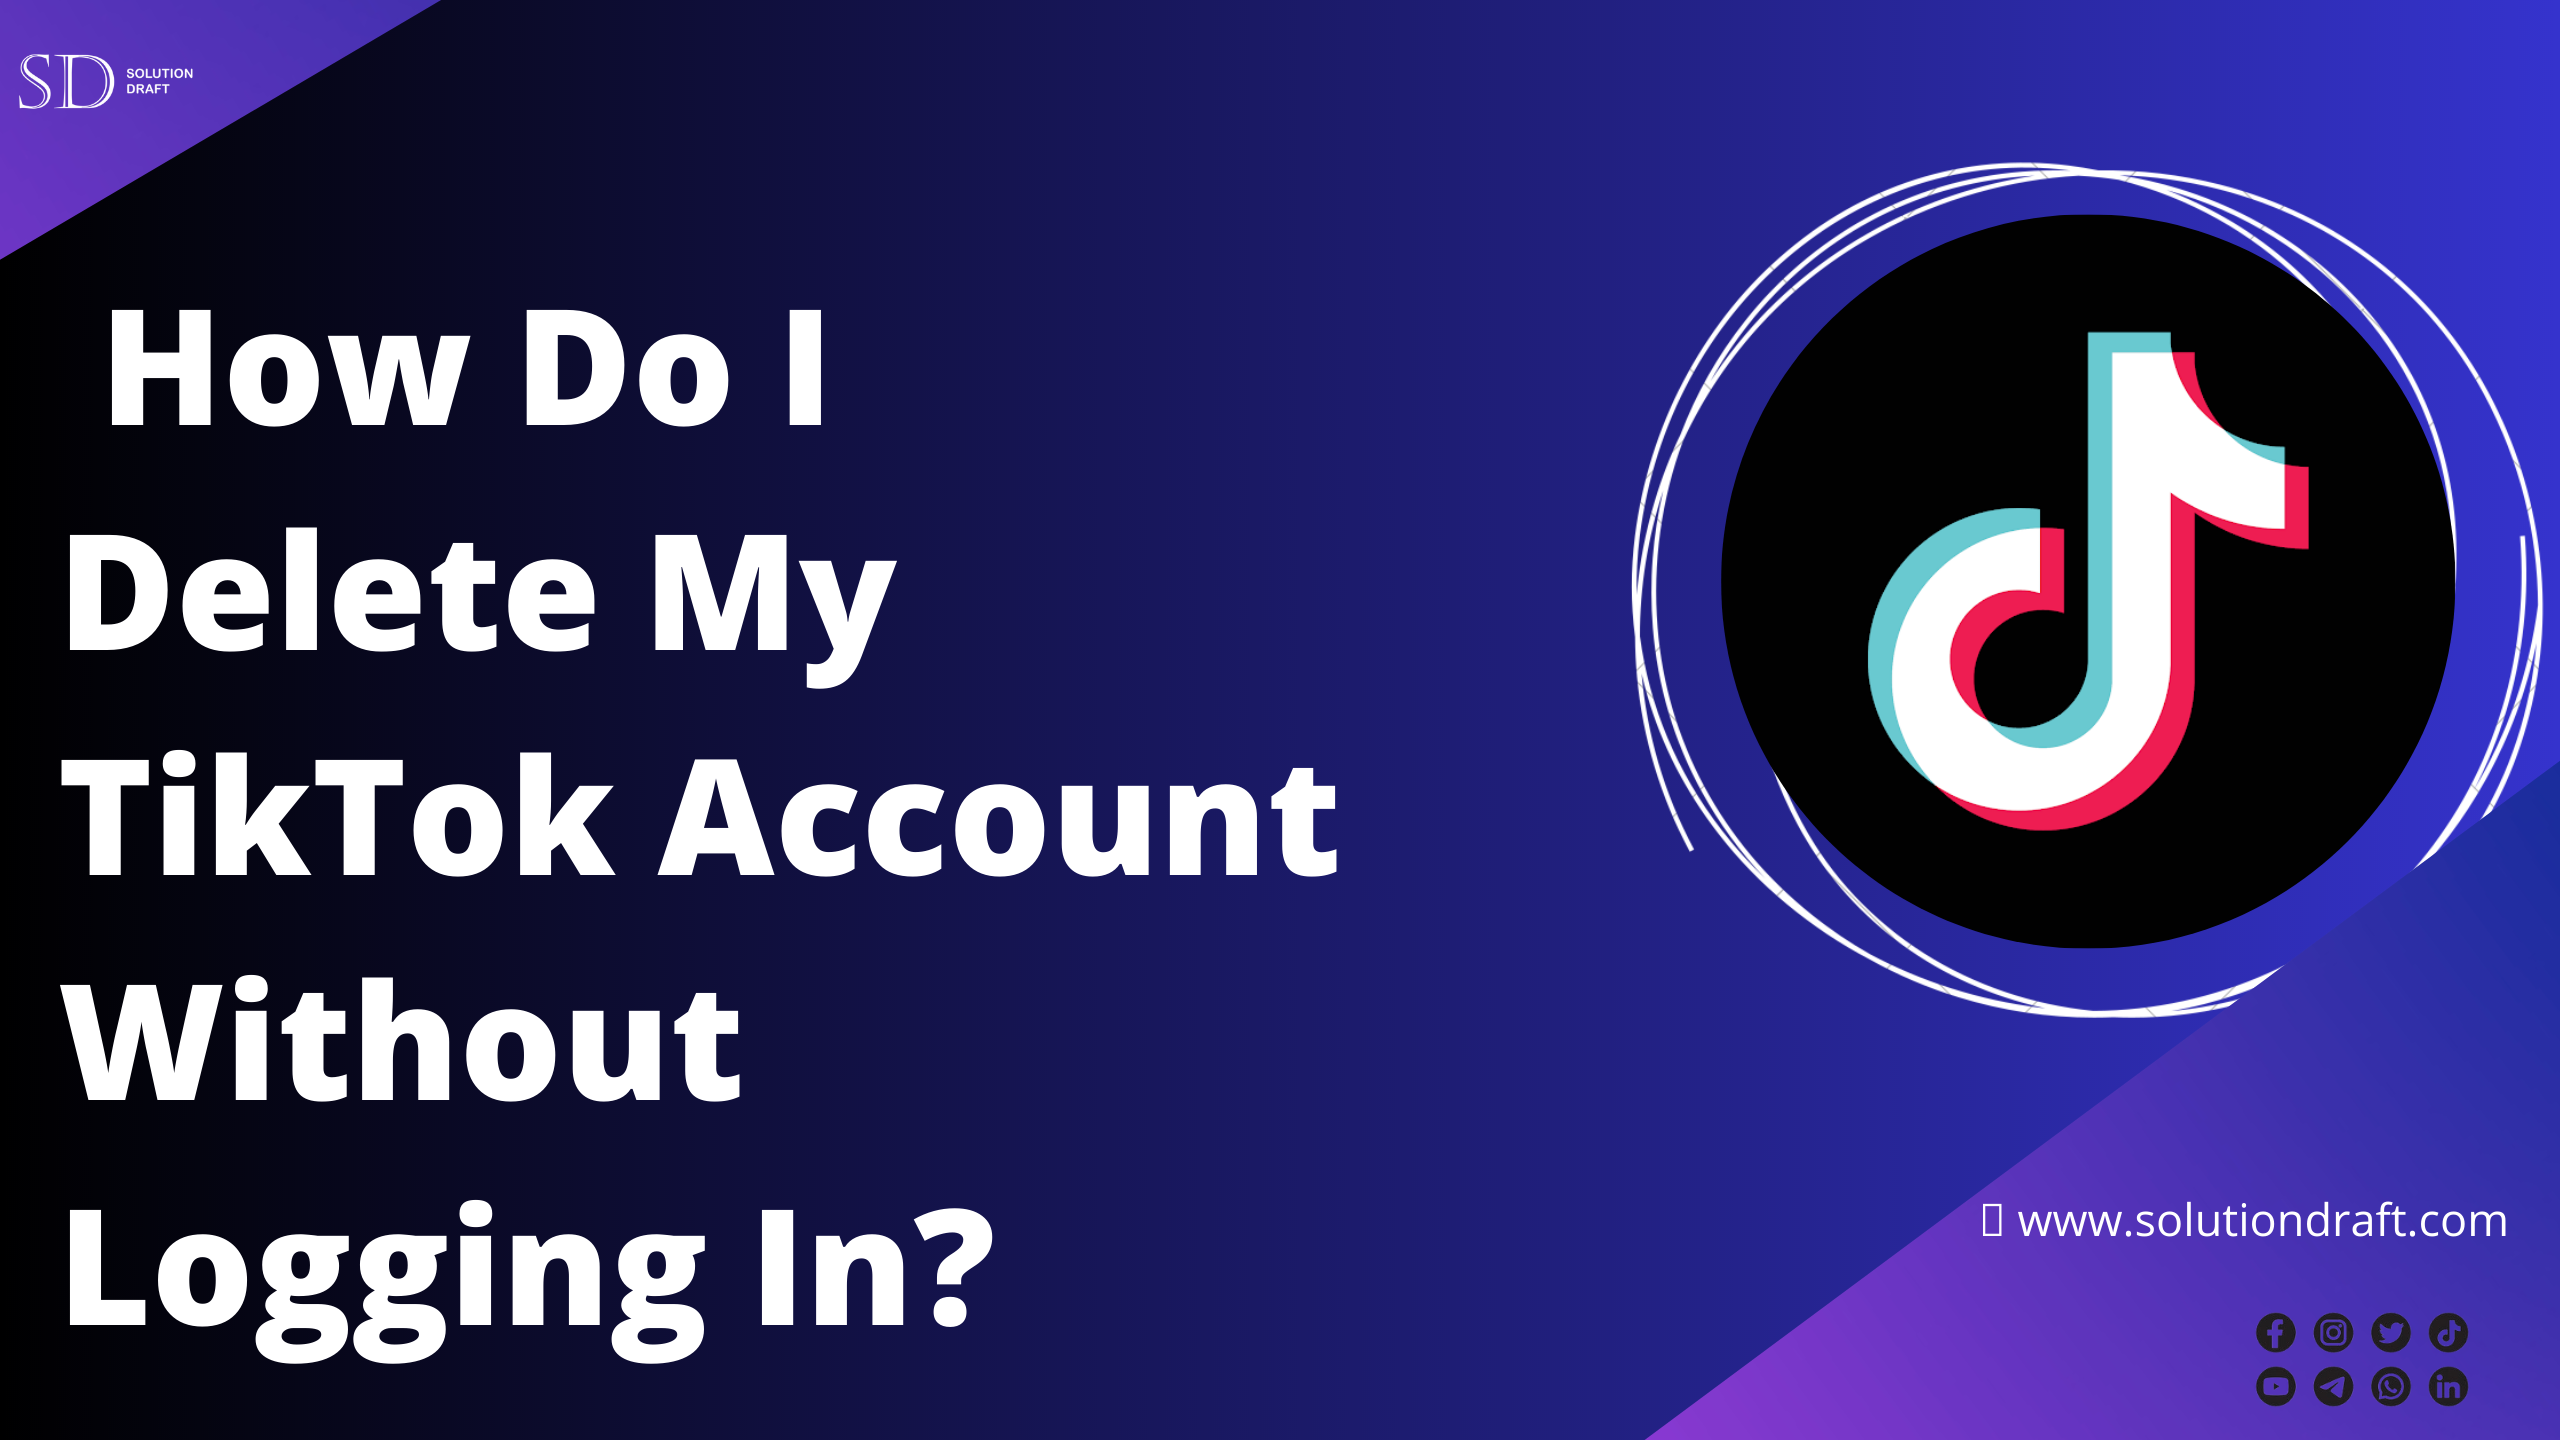 How Do I Delete My TikTok Account Without Logging In?